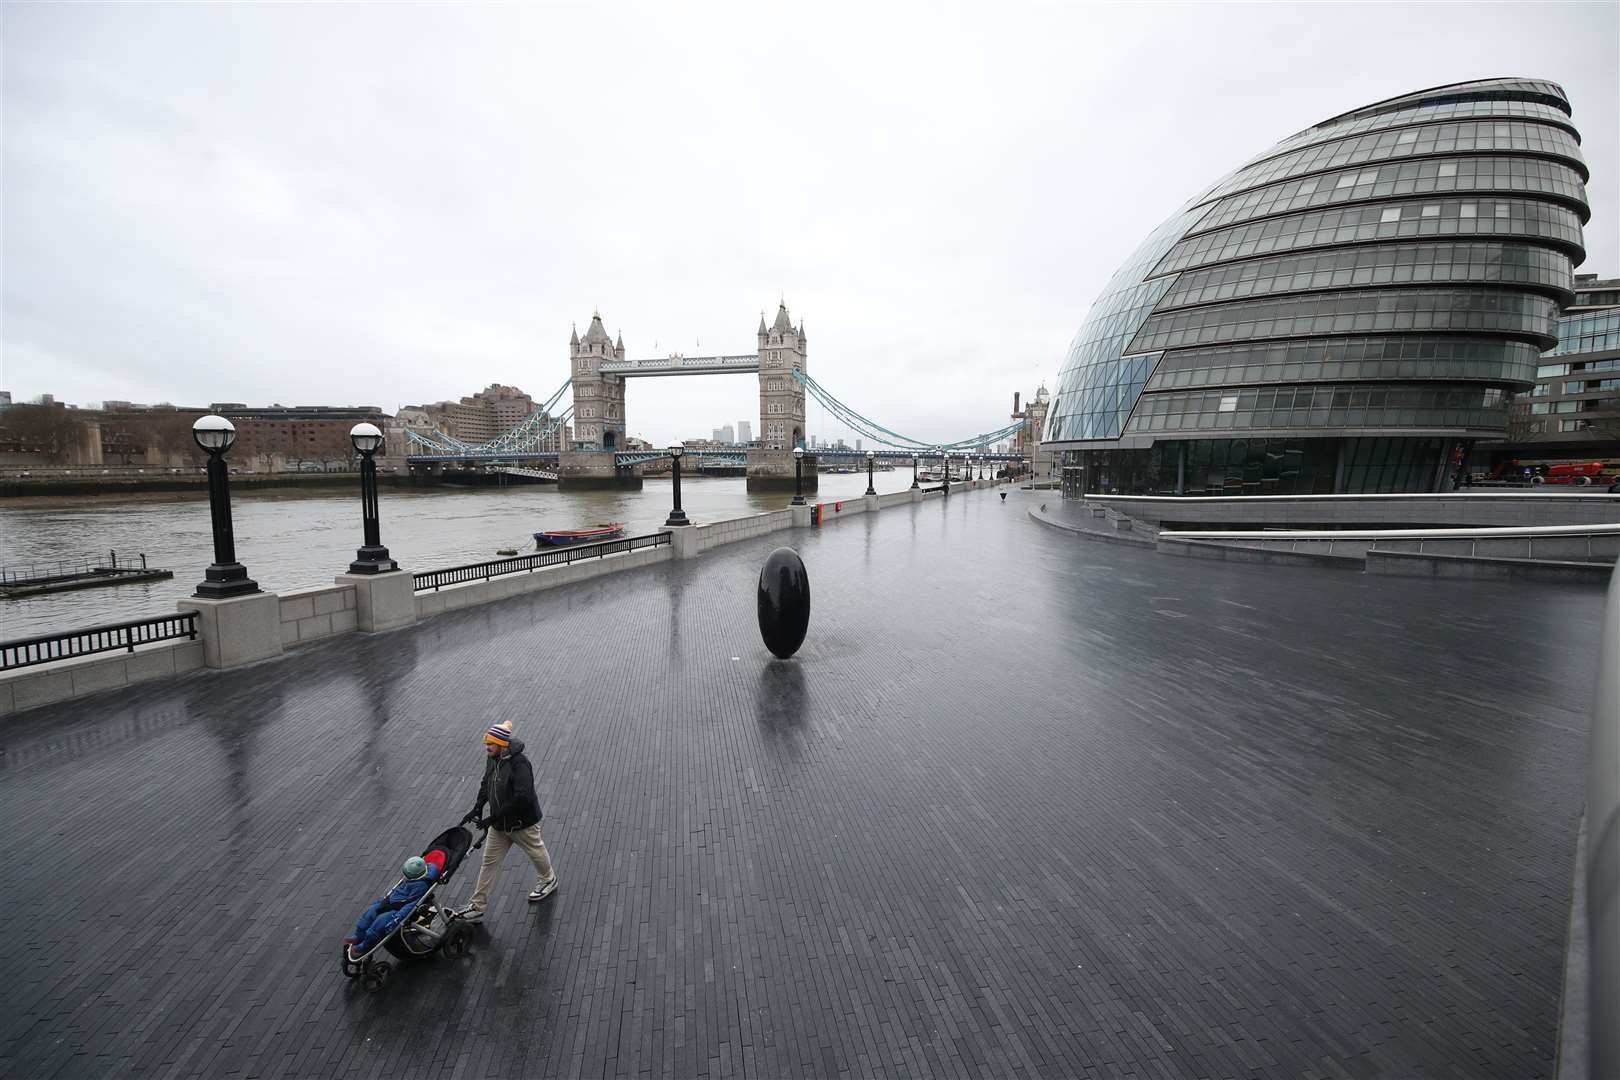 The riverside walk next to Tower Bridge in London was empty the morning after Prime Minister Boris Johnson set out lockdown measures for England (Yui Mok/PA)